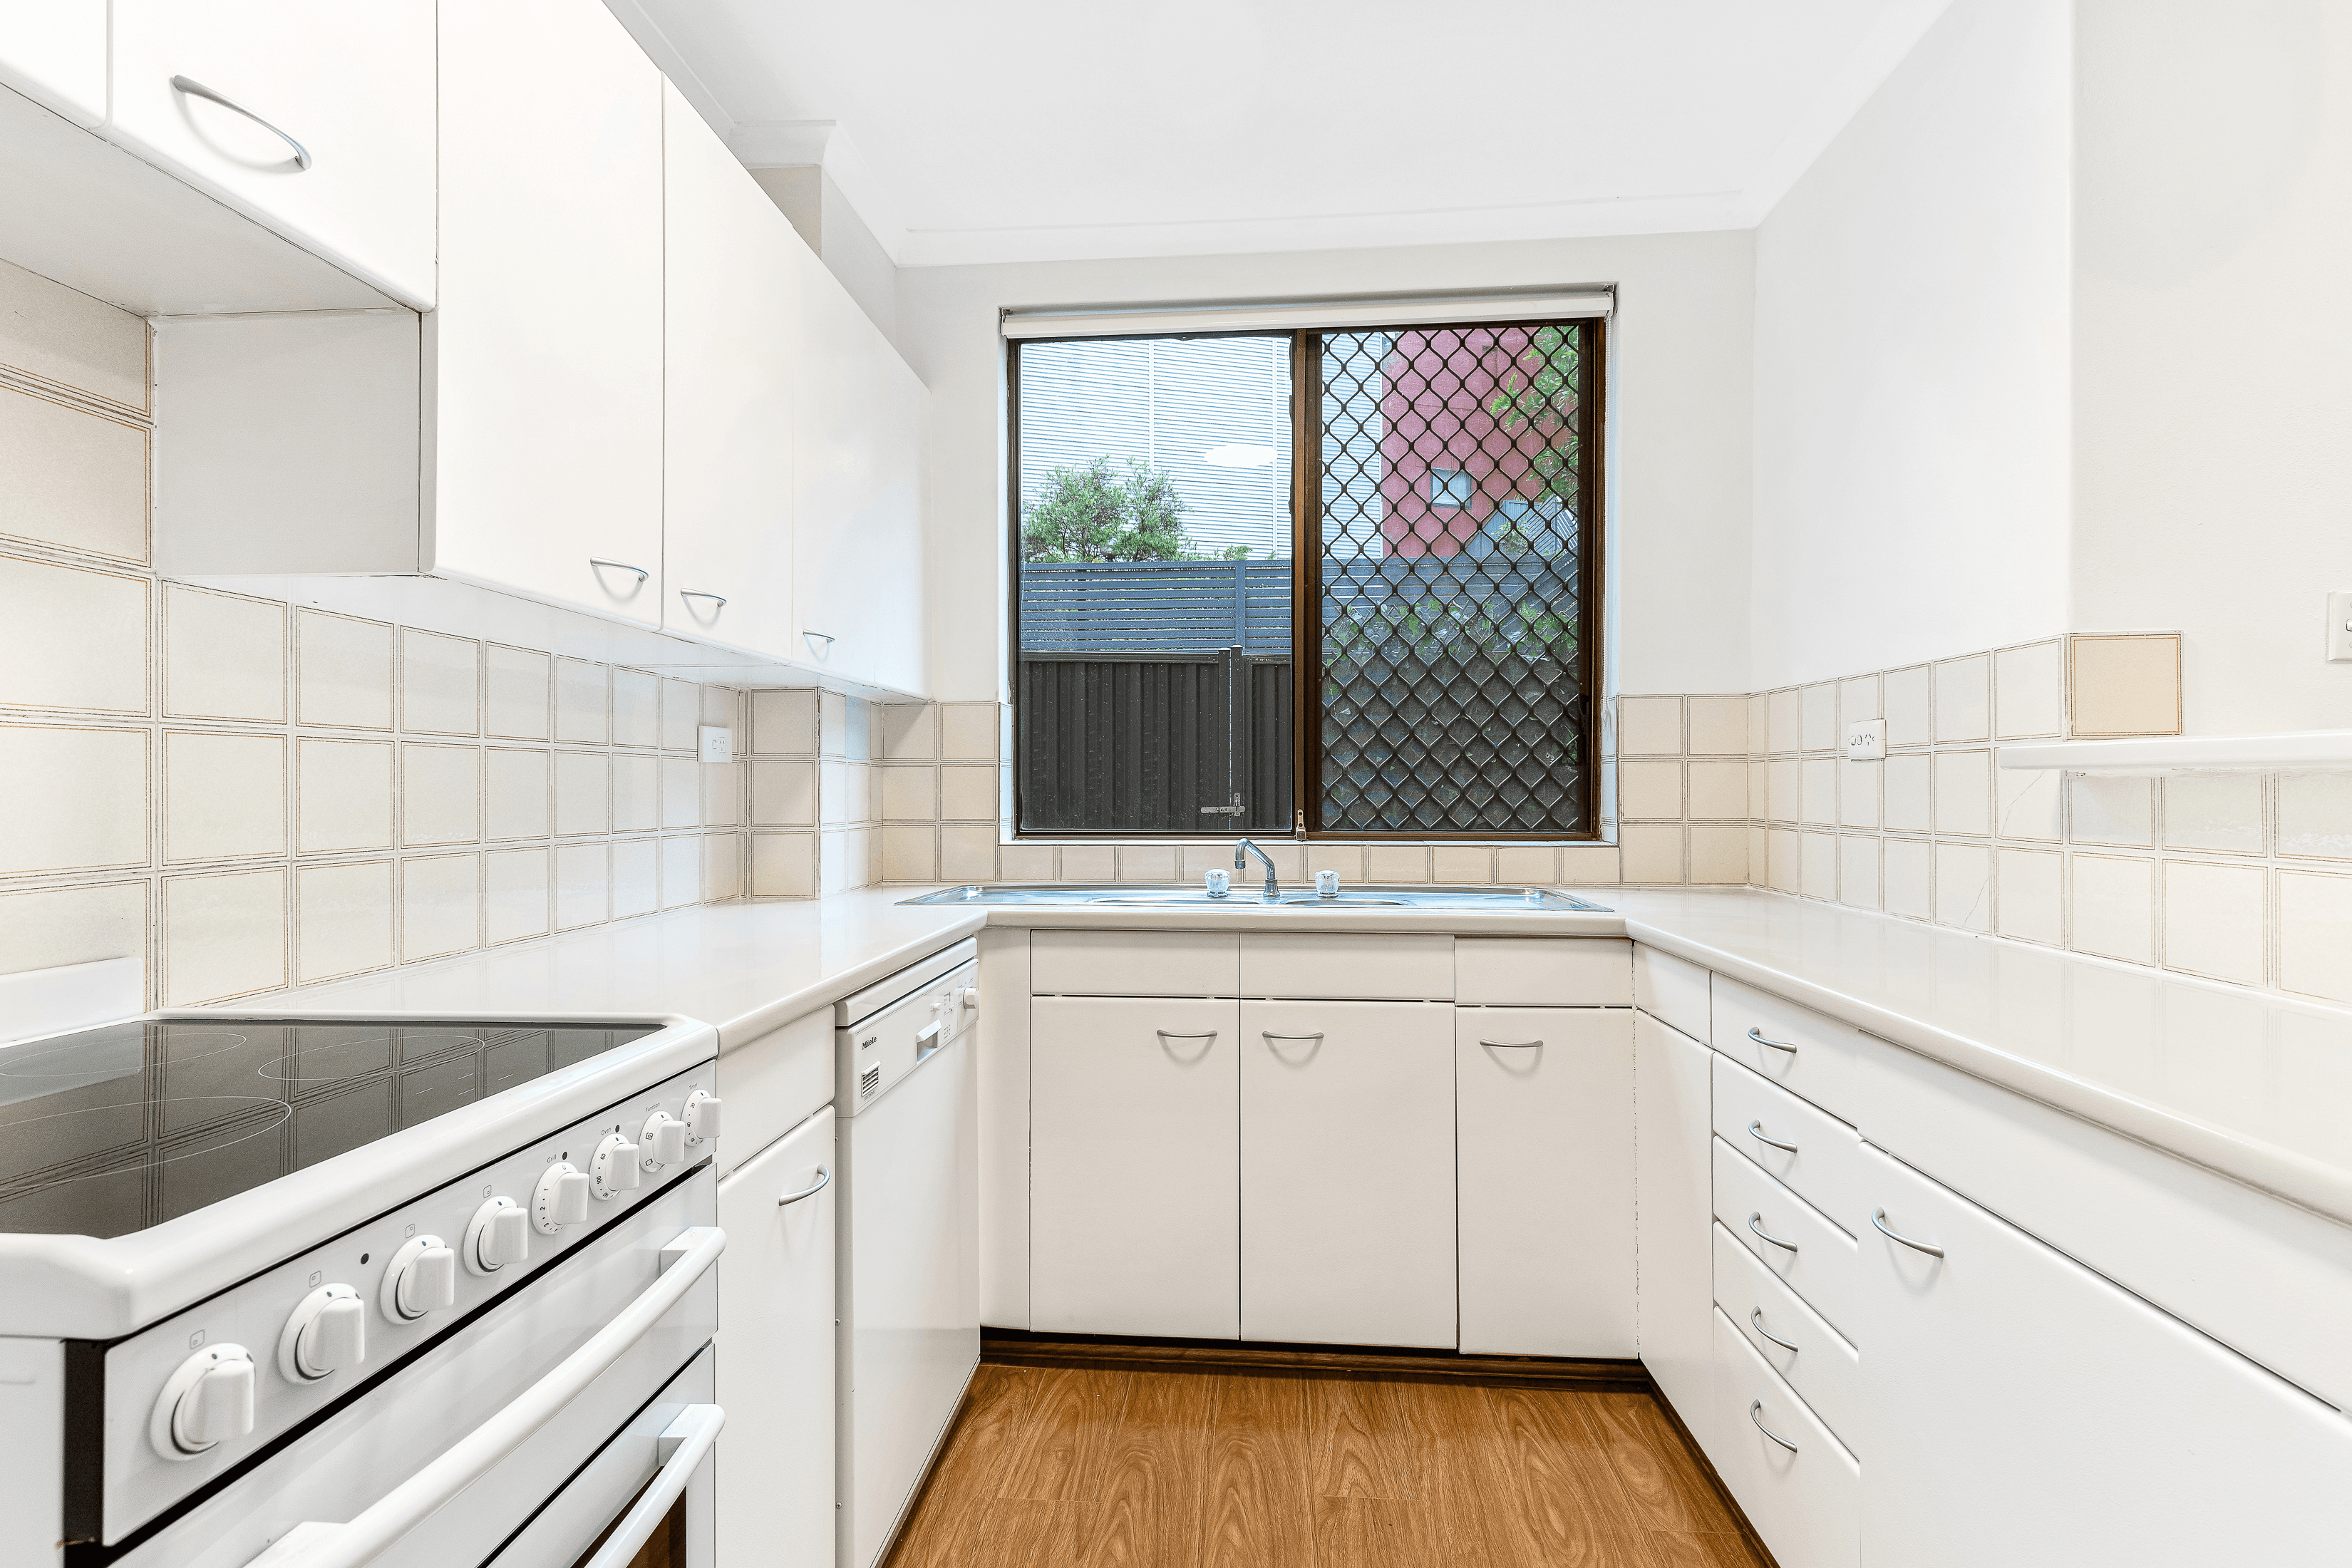 37/2 Goodlet Street, SURRY HILLS, NSW 2010